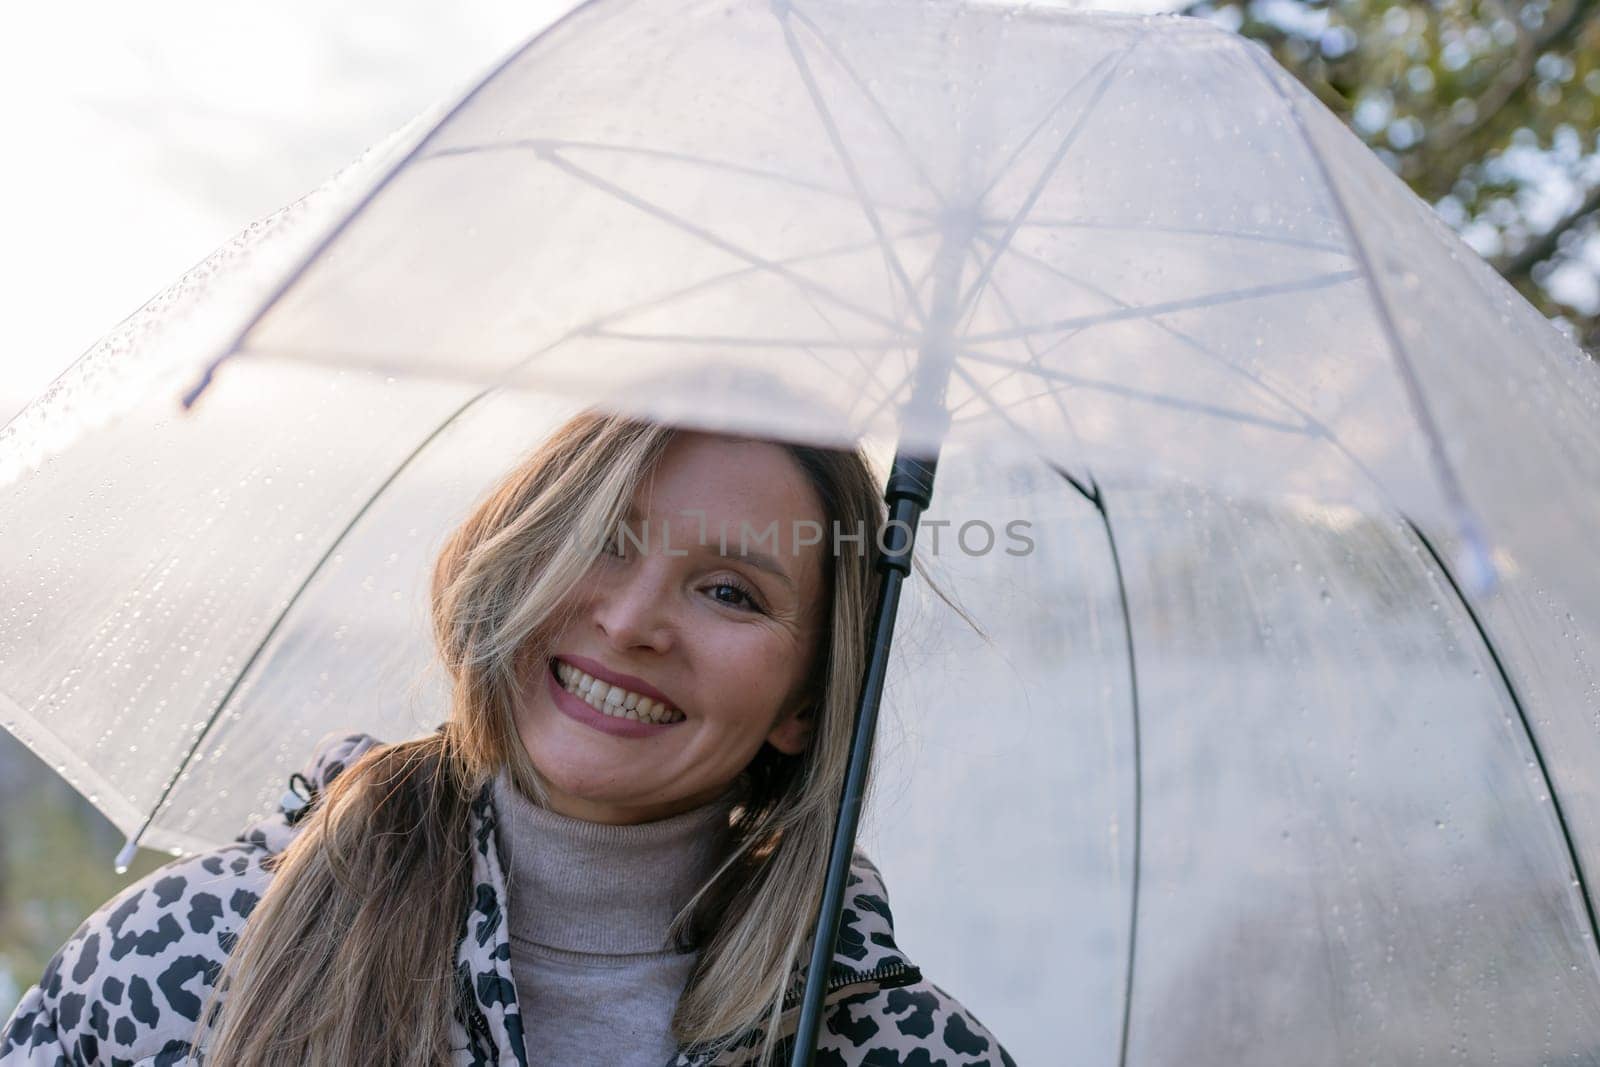 A woman is smiling under a clear umbrella. The umbrella is white and has a black handle. The woman is wearing a jacket and a scarf. by Matiunina